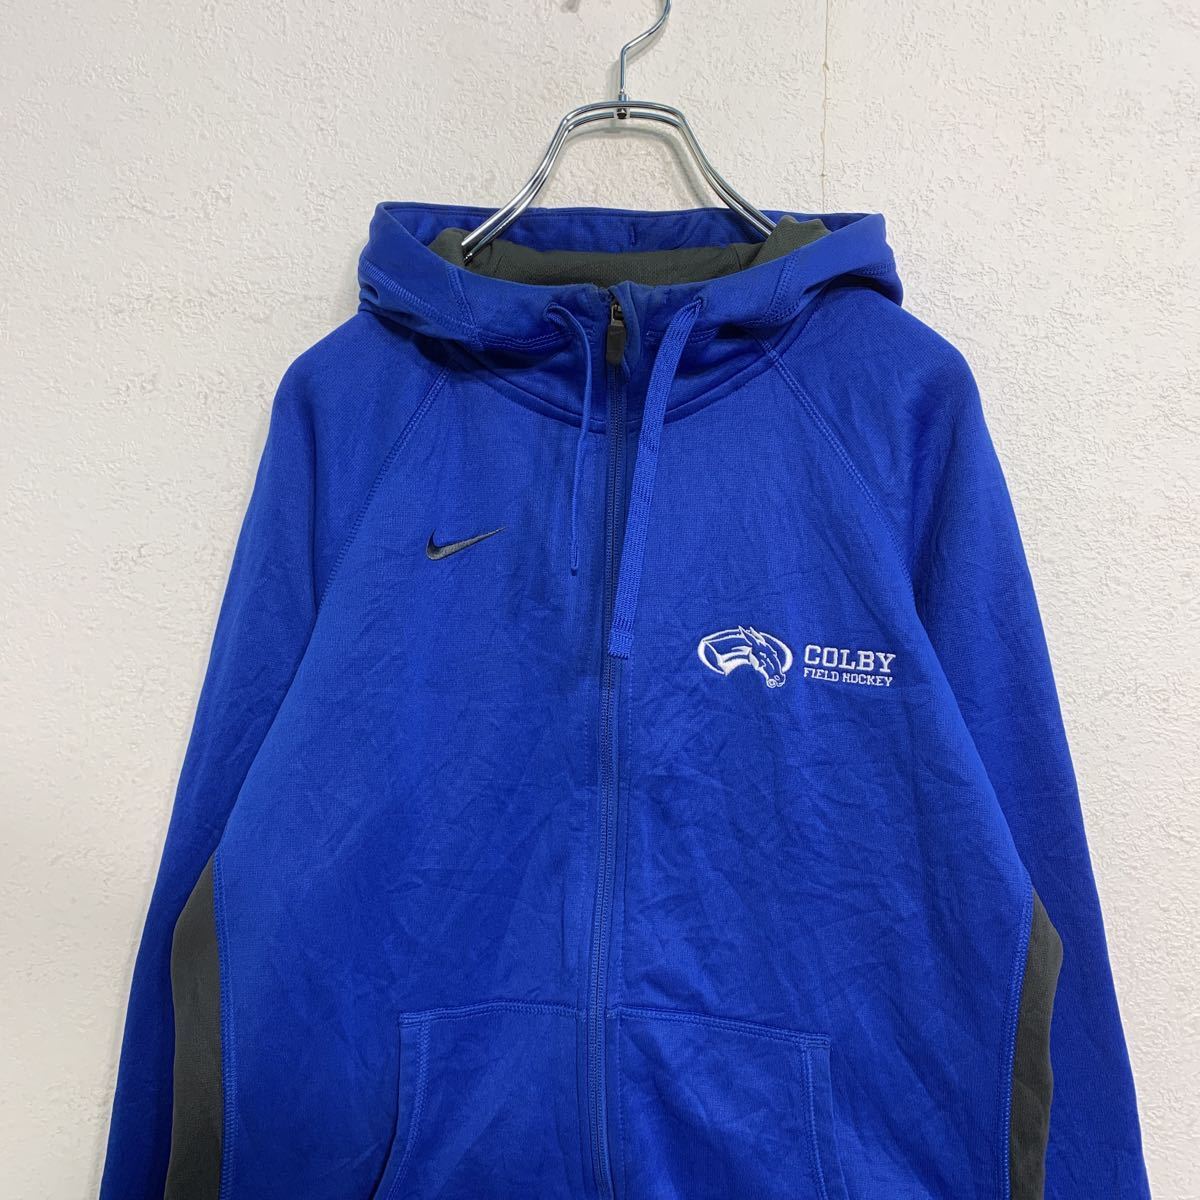 NIKE Zip up jersey jacket M blue black Nike sport THERMA FIT old clothes . America stock a408-5600